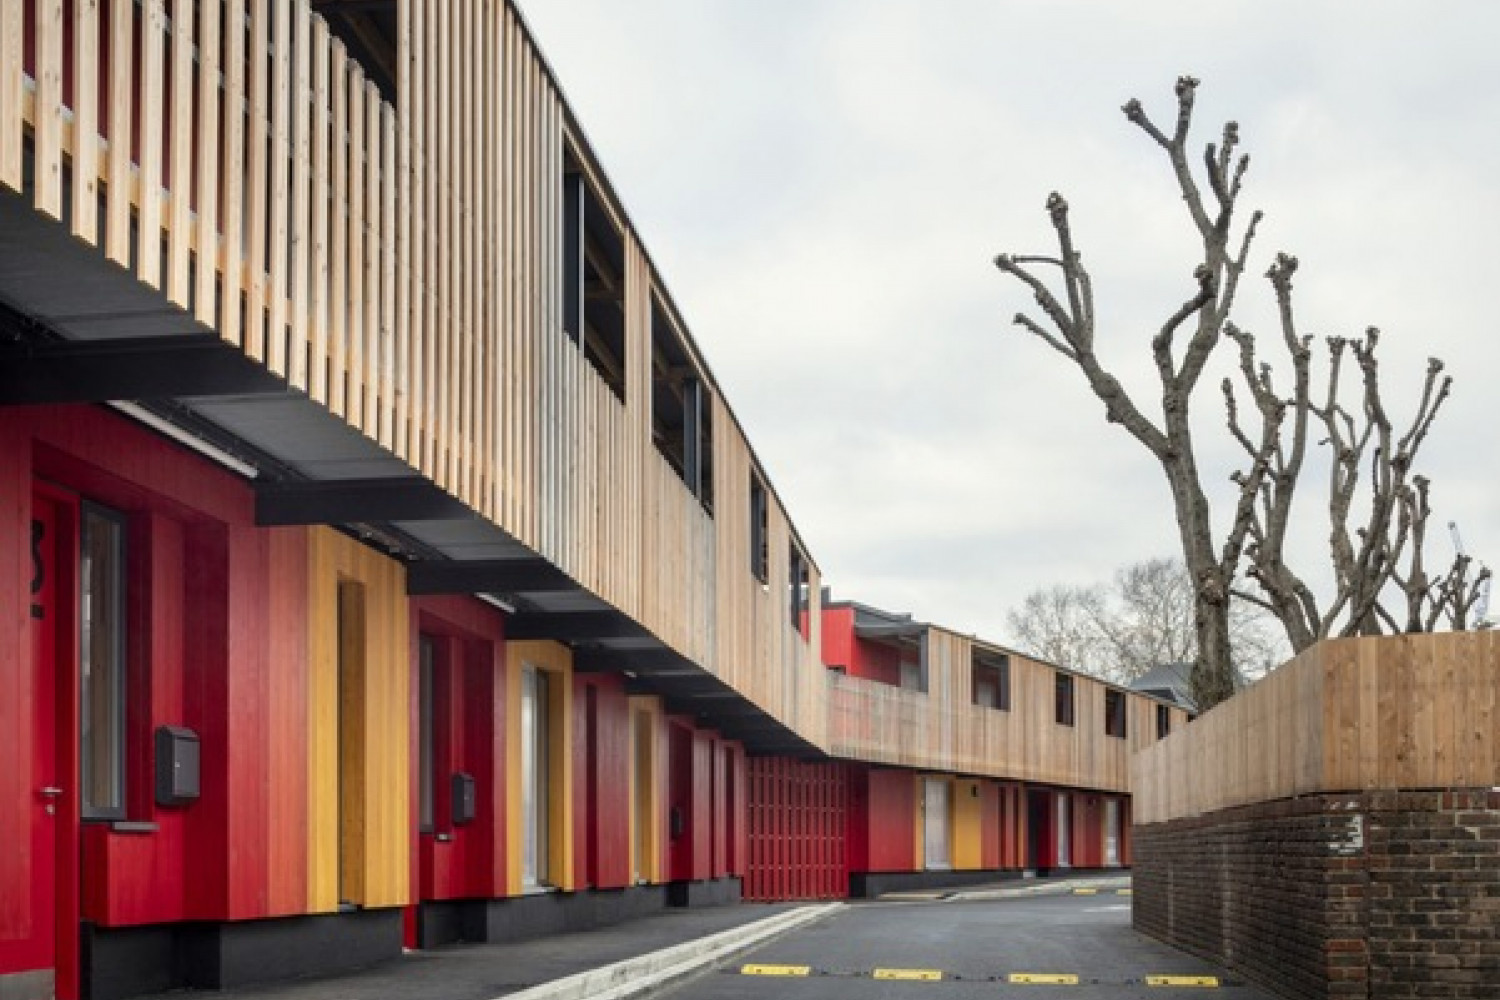 Colourful street frontage, Poplar project. Photo: Anthony Coleman